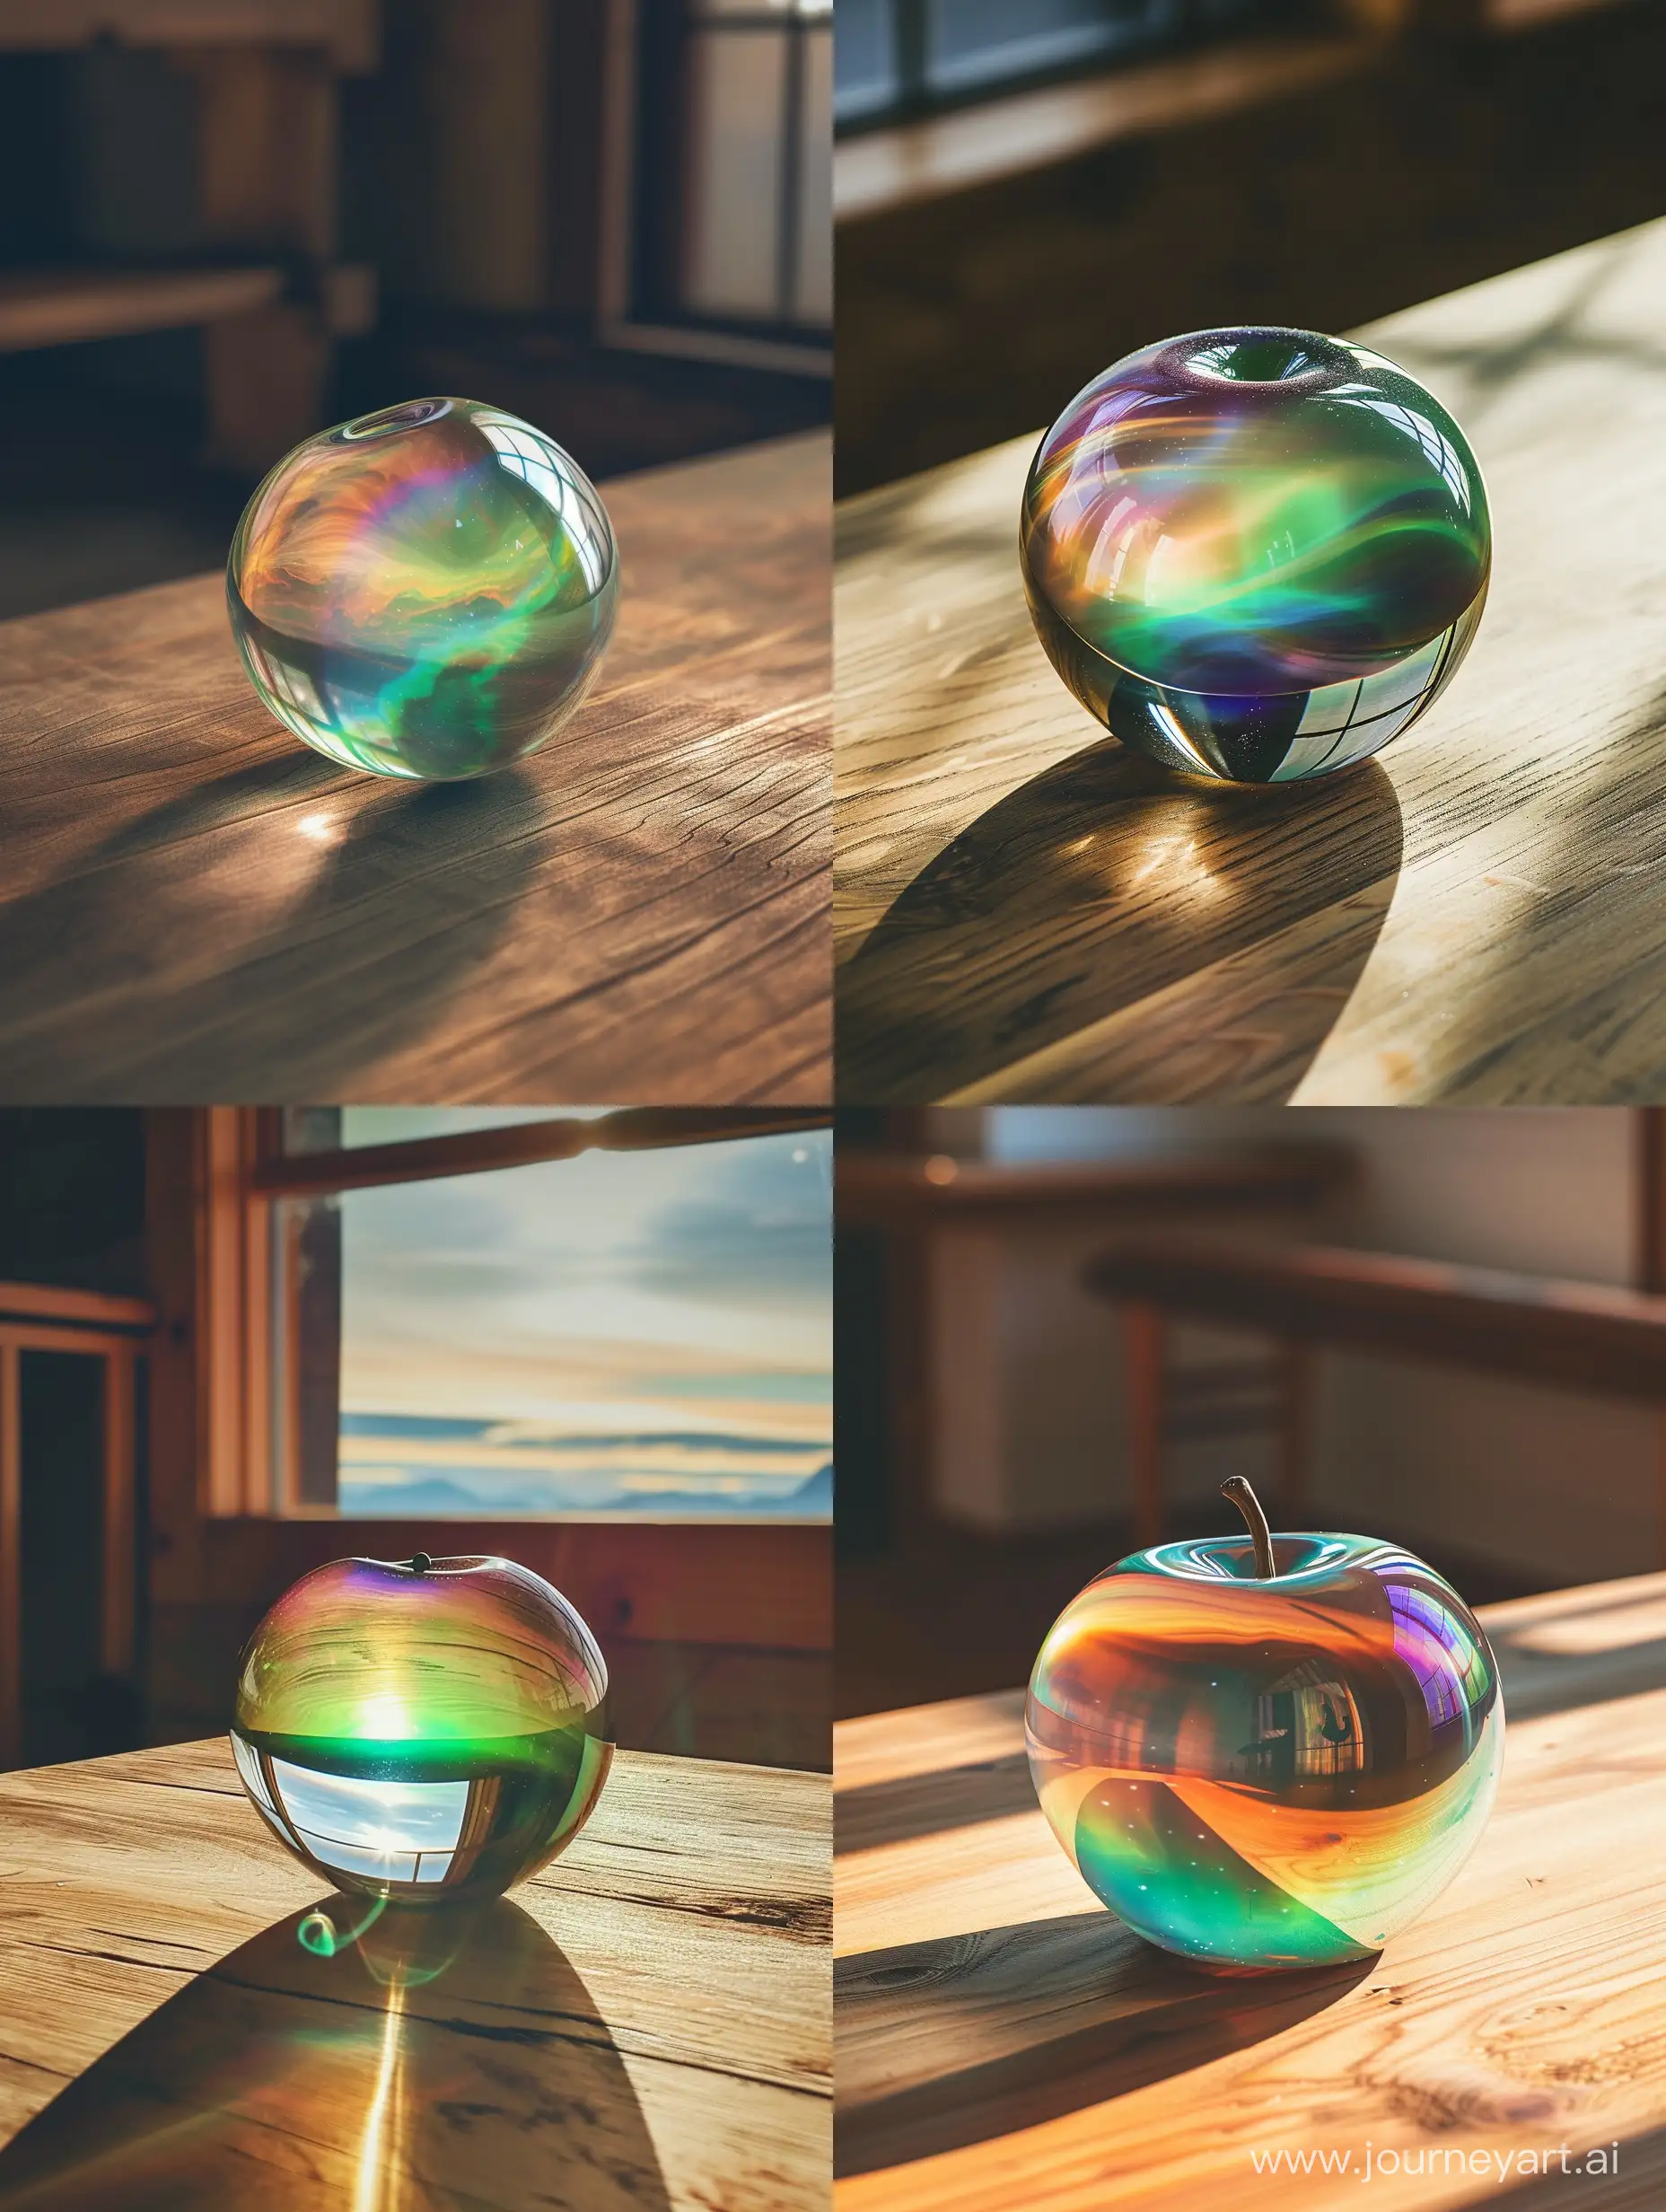 A glass apple on a wooden table, filled with the colors of the aurora borealis. The apple is perfectly round and smooth, and it has a slight green tint. The wooden table is simple and unfurnished, and the only light comes from a small window. Dynamic. 